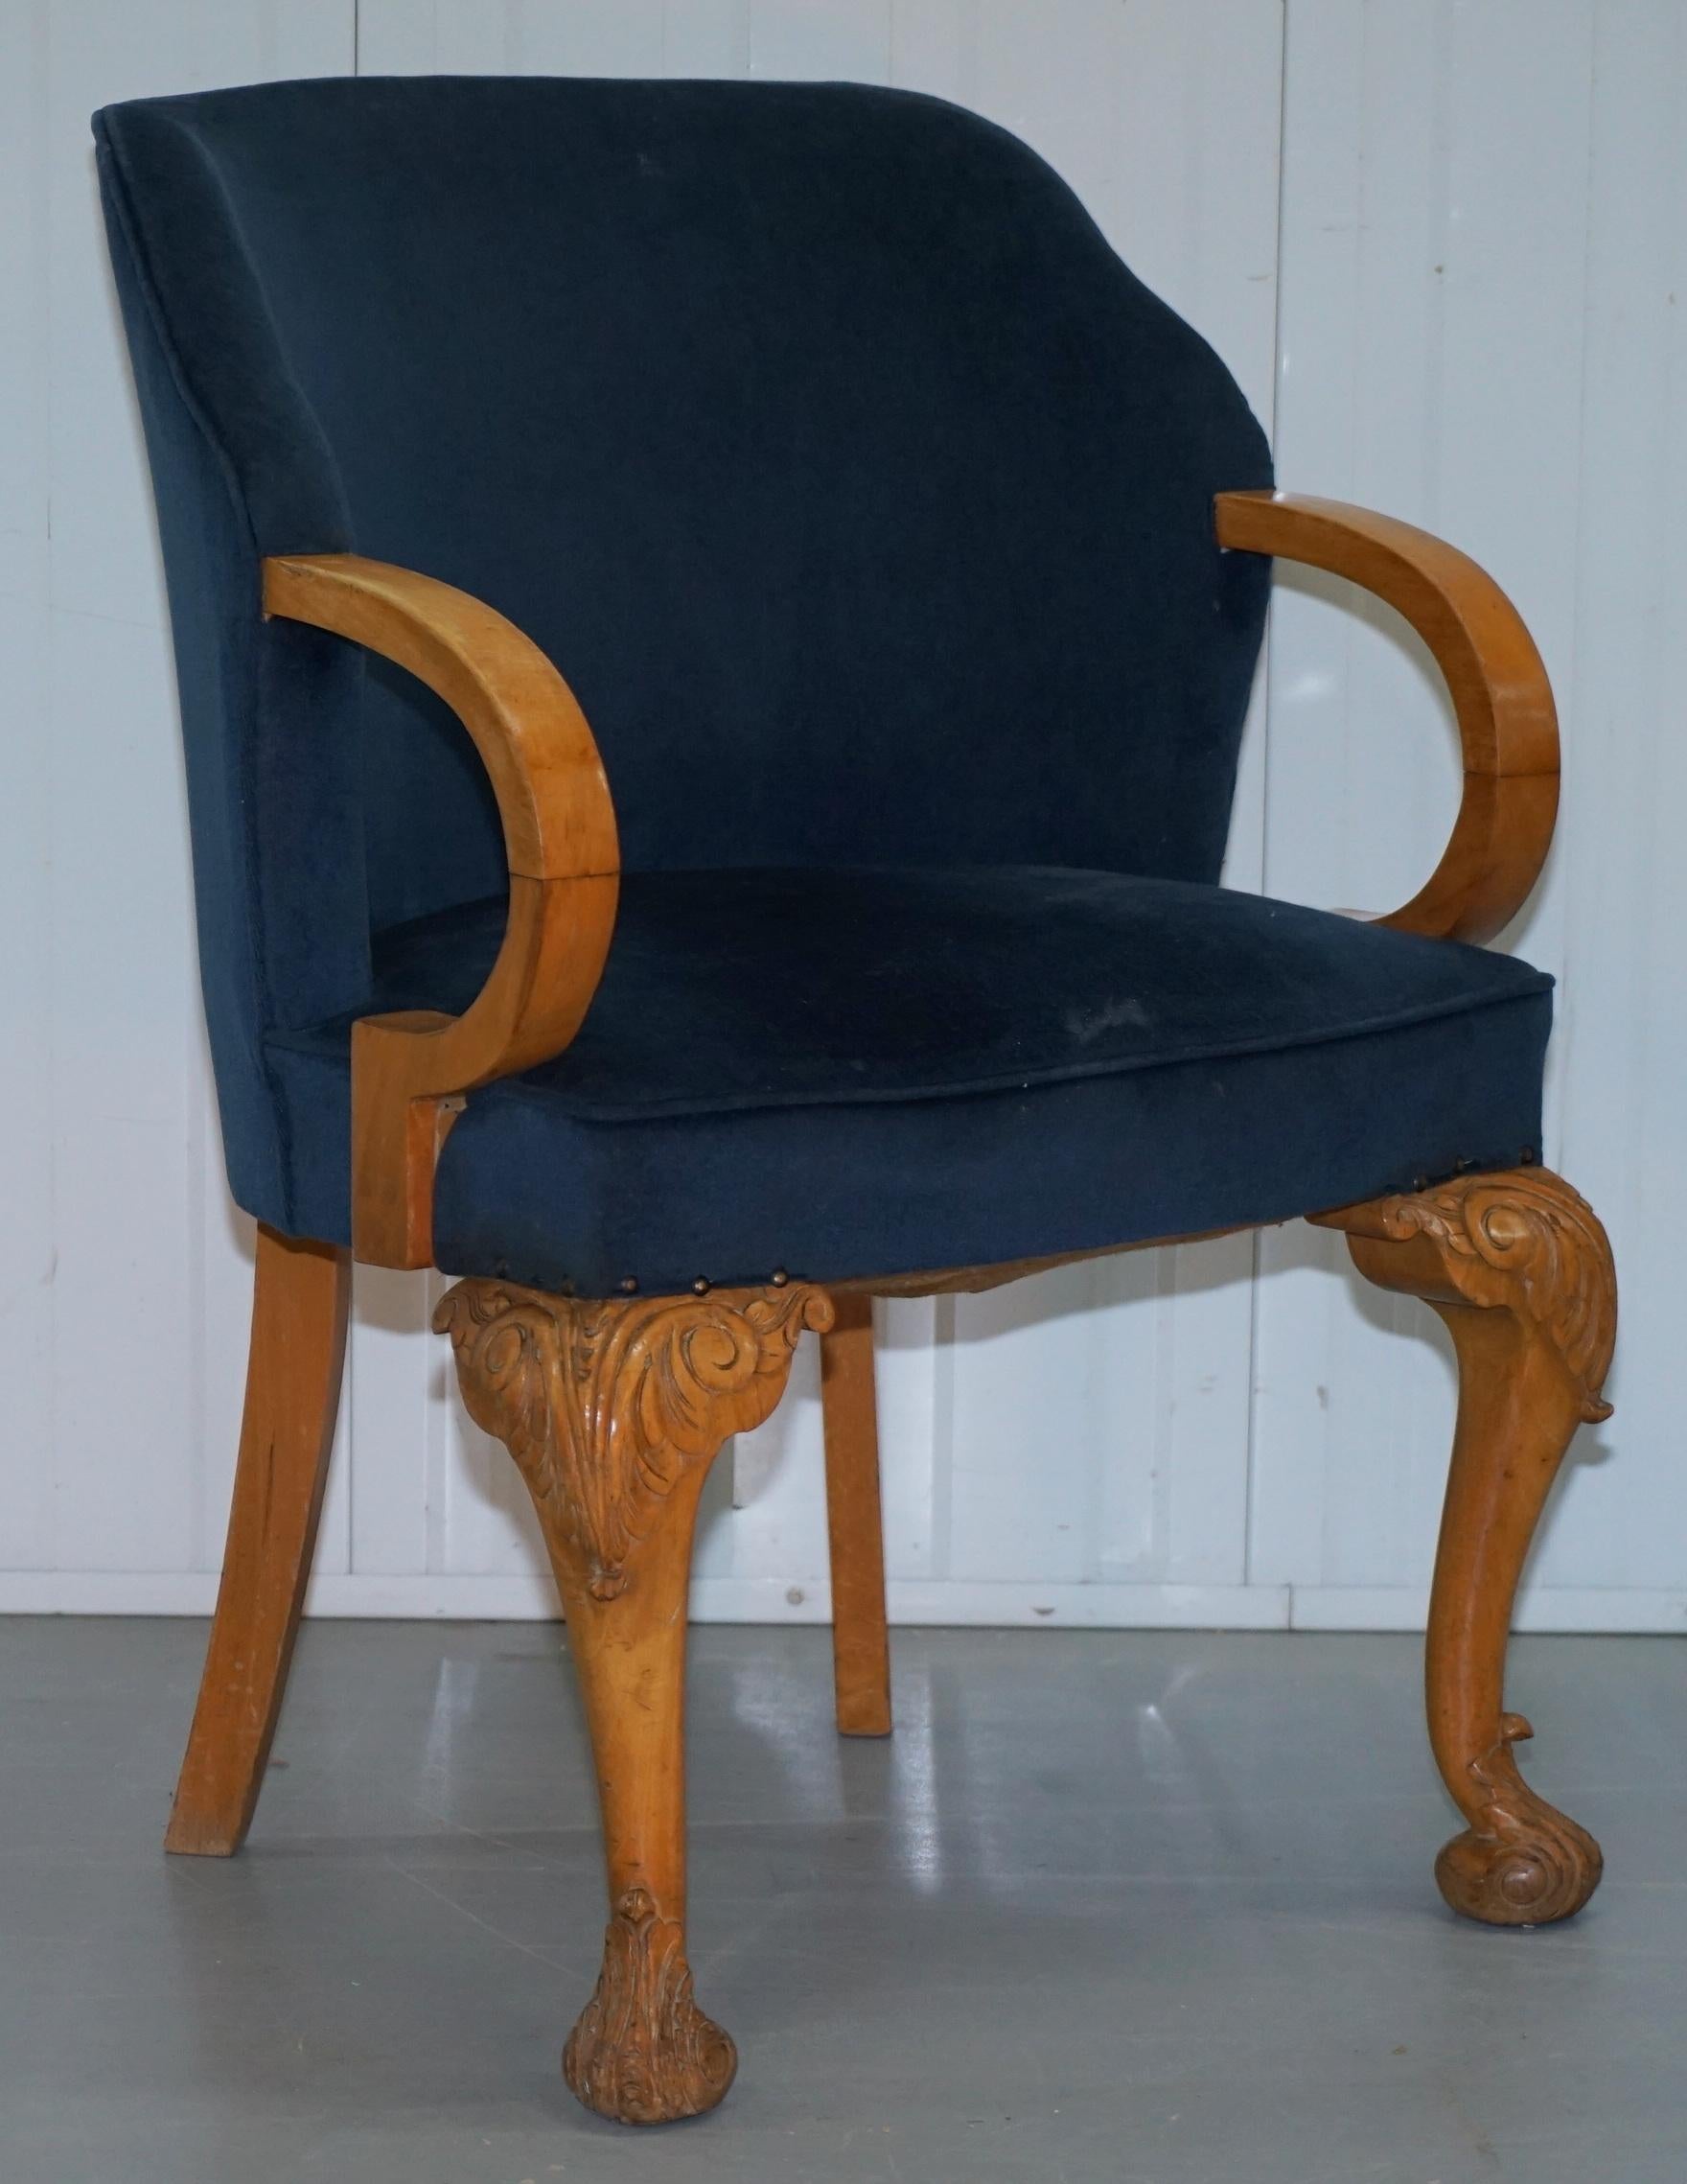 We are delighted to offer for sale this rather lovely pair of 1930’s Art Deco tub armchairs with hand carved legs in the Georgian style and Royal Blue Dralon upholstery

A good looking and well-made pair, the frames are solid beech, hand carved